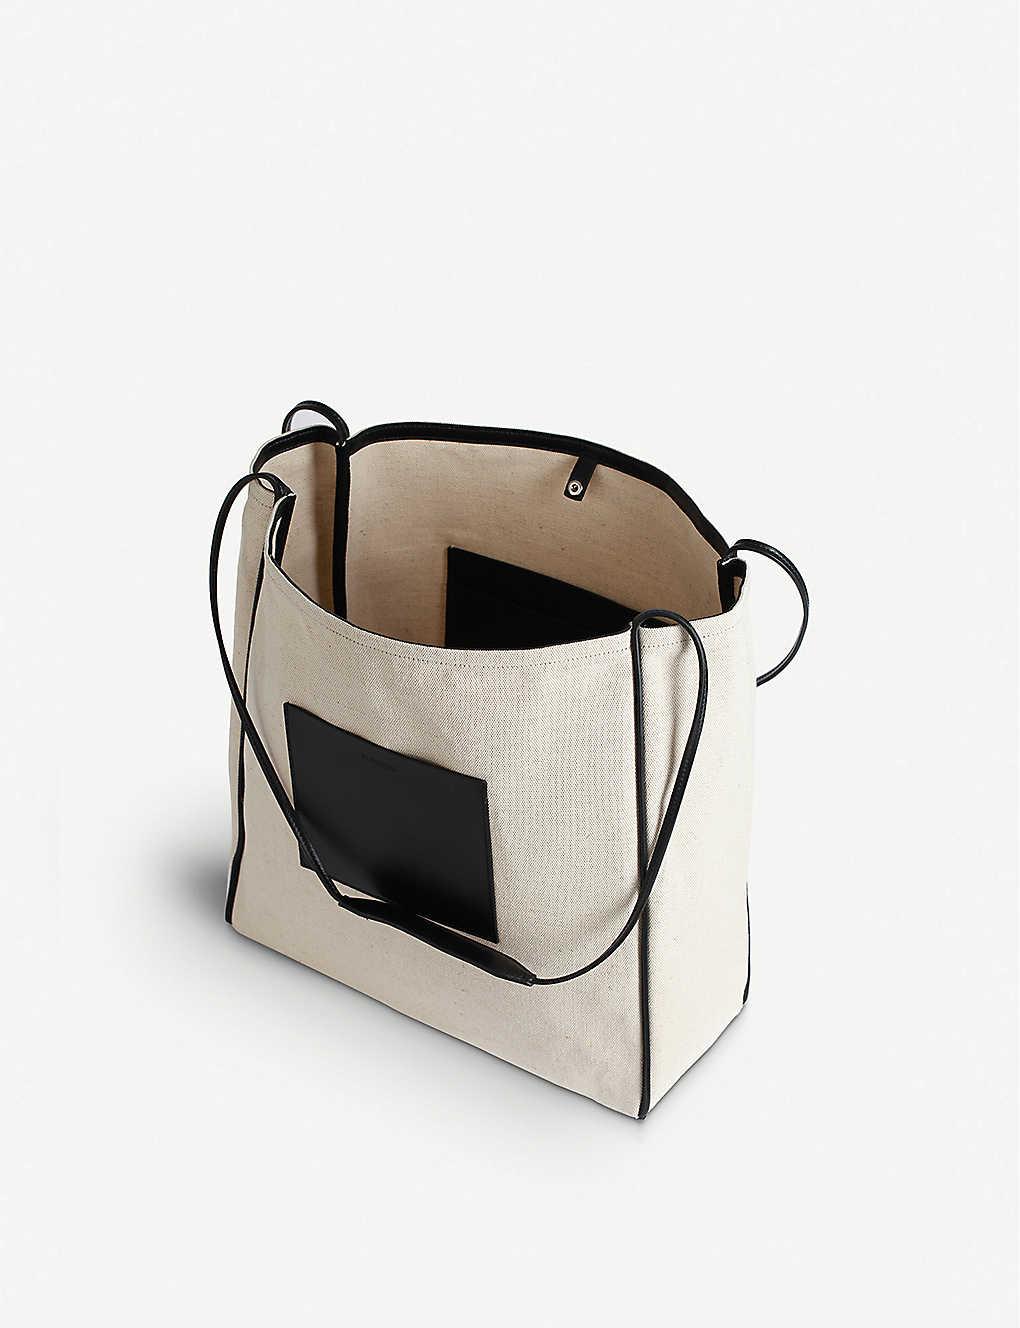 Jil Sander Border Medium Canvas And Leather Tote Bag in Natural | Lyst